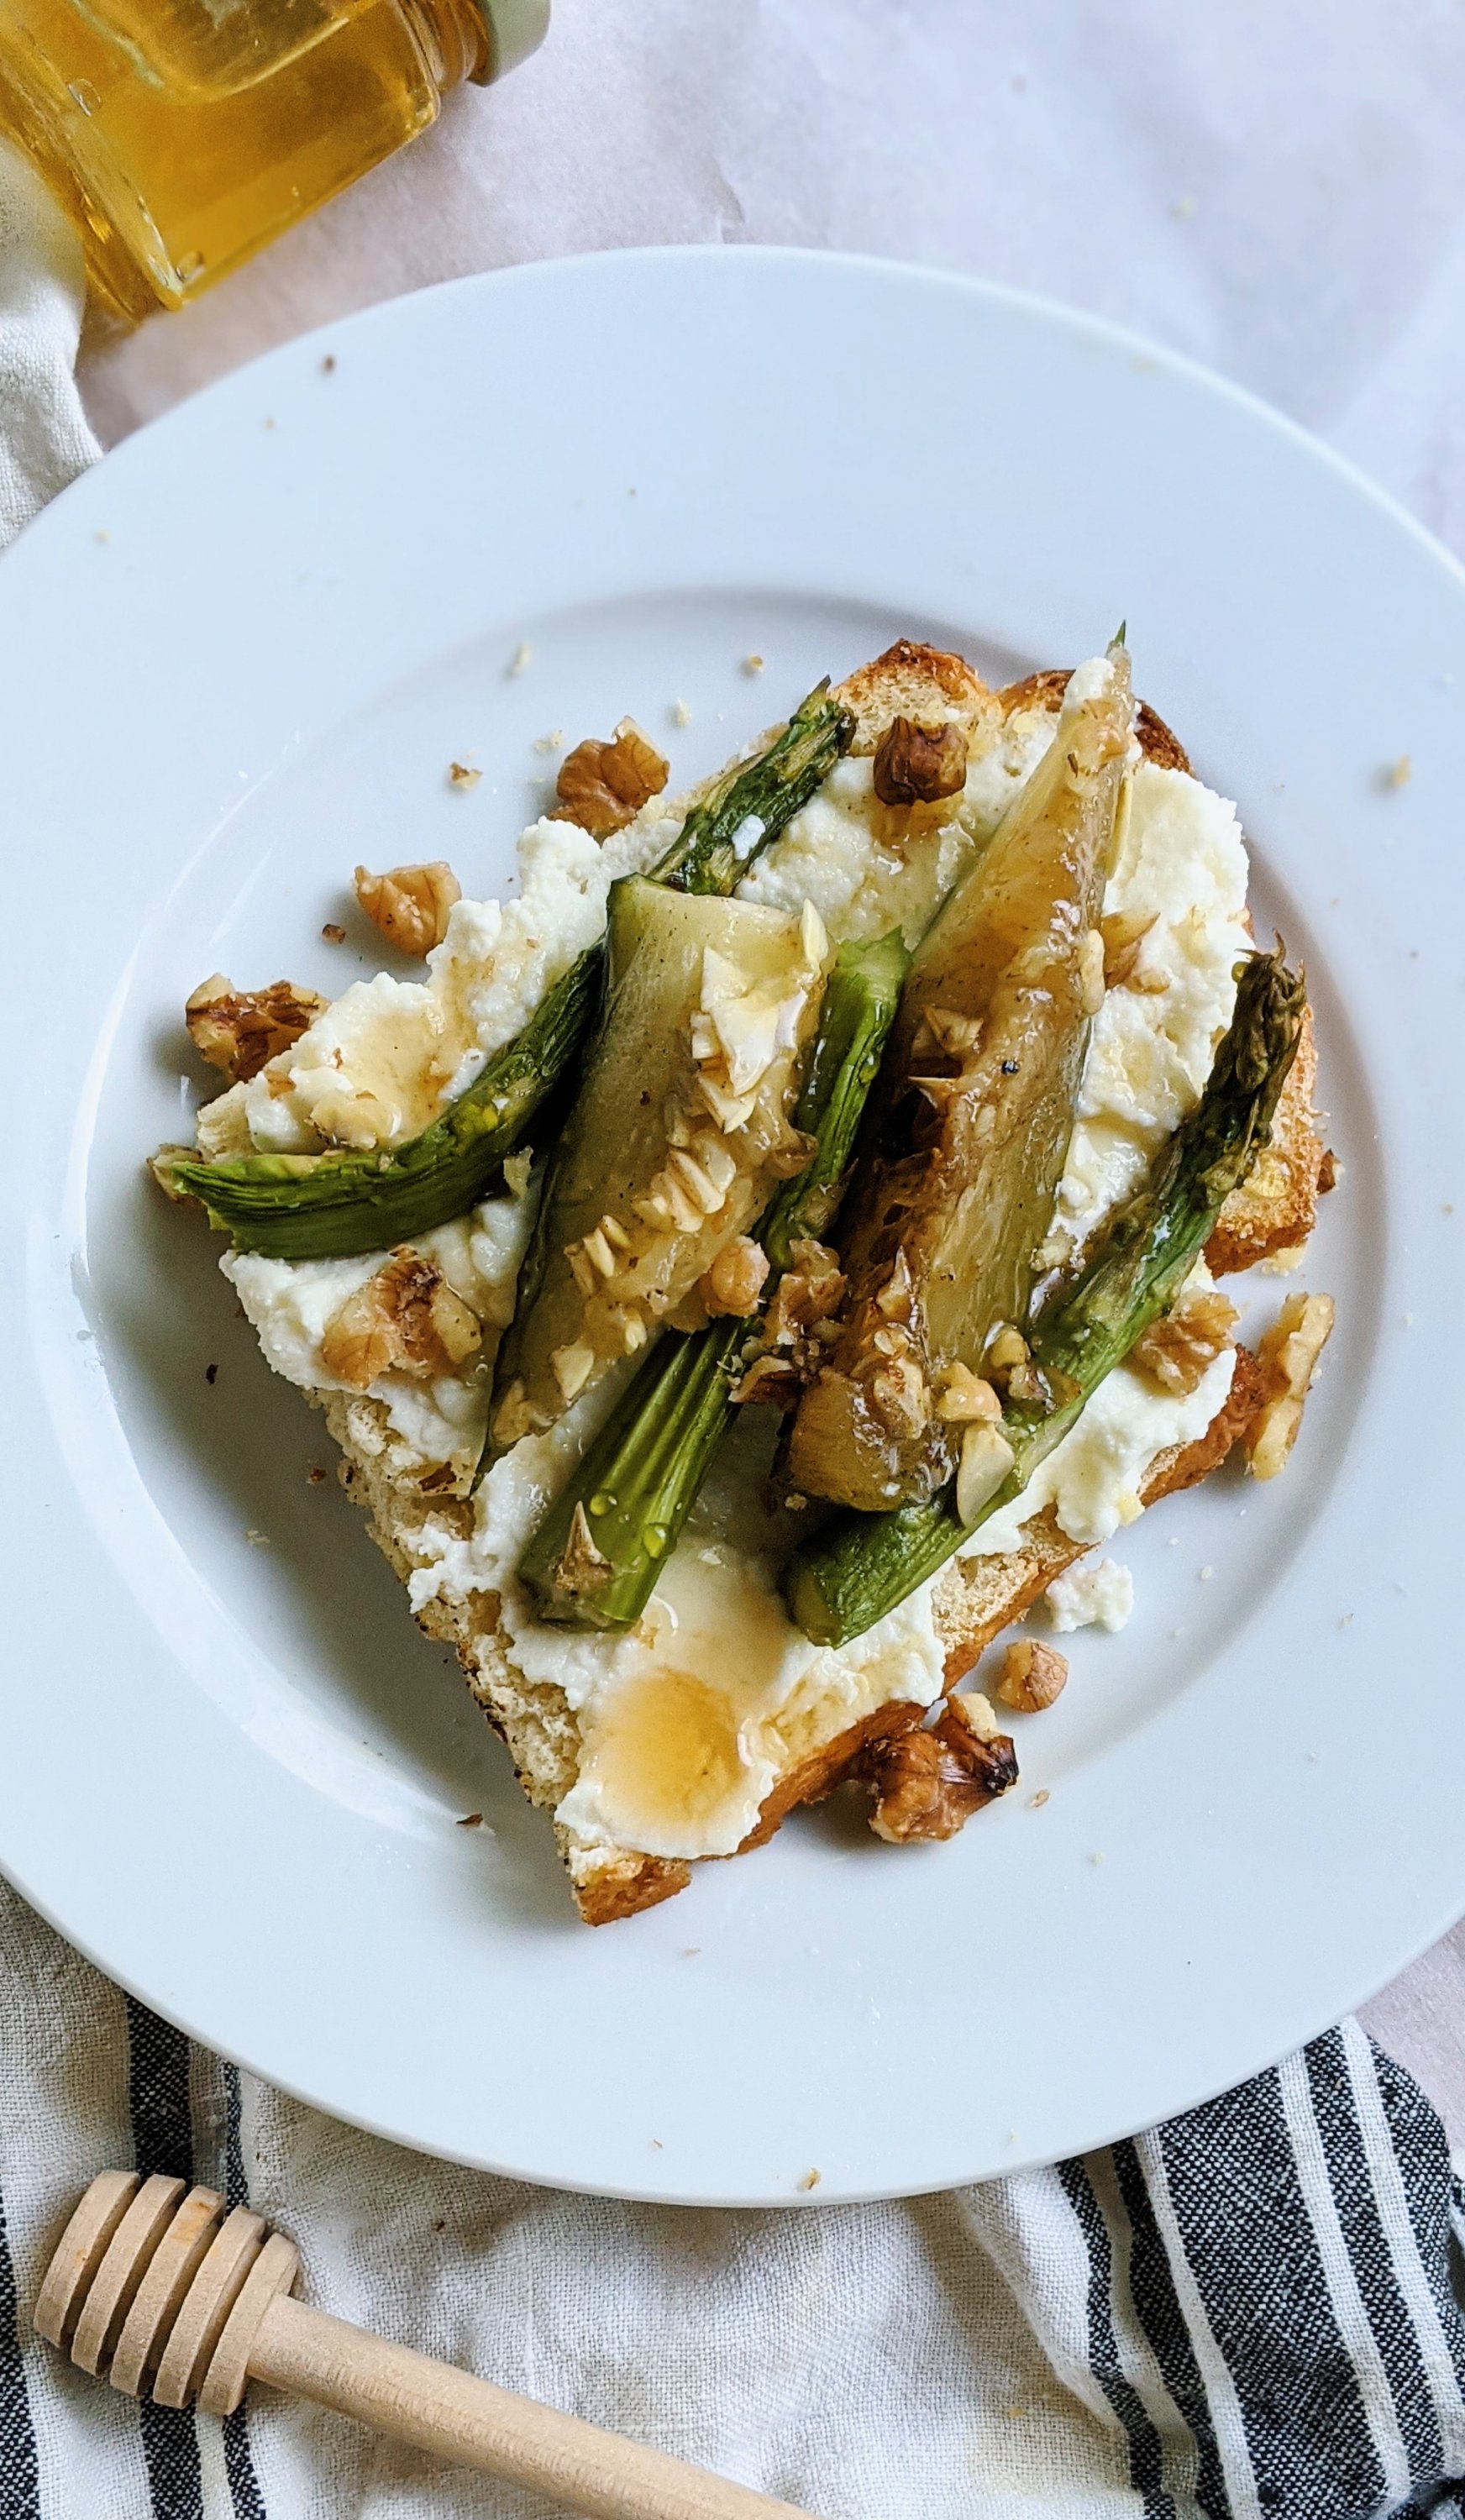 vegetable breakfast recipes with ricotta asparagus and zucchini squash on toast recipe brunch vegetables healthy breakfast ideas with grilled vegetables or leftover sauteed vegetables on toast